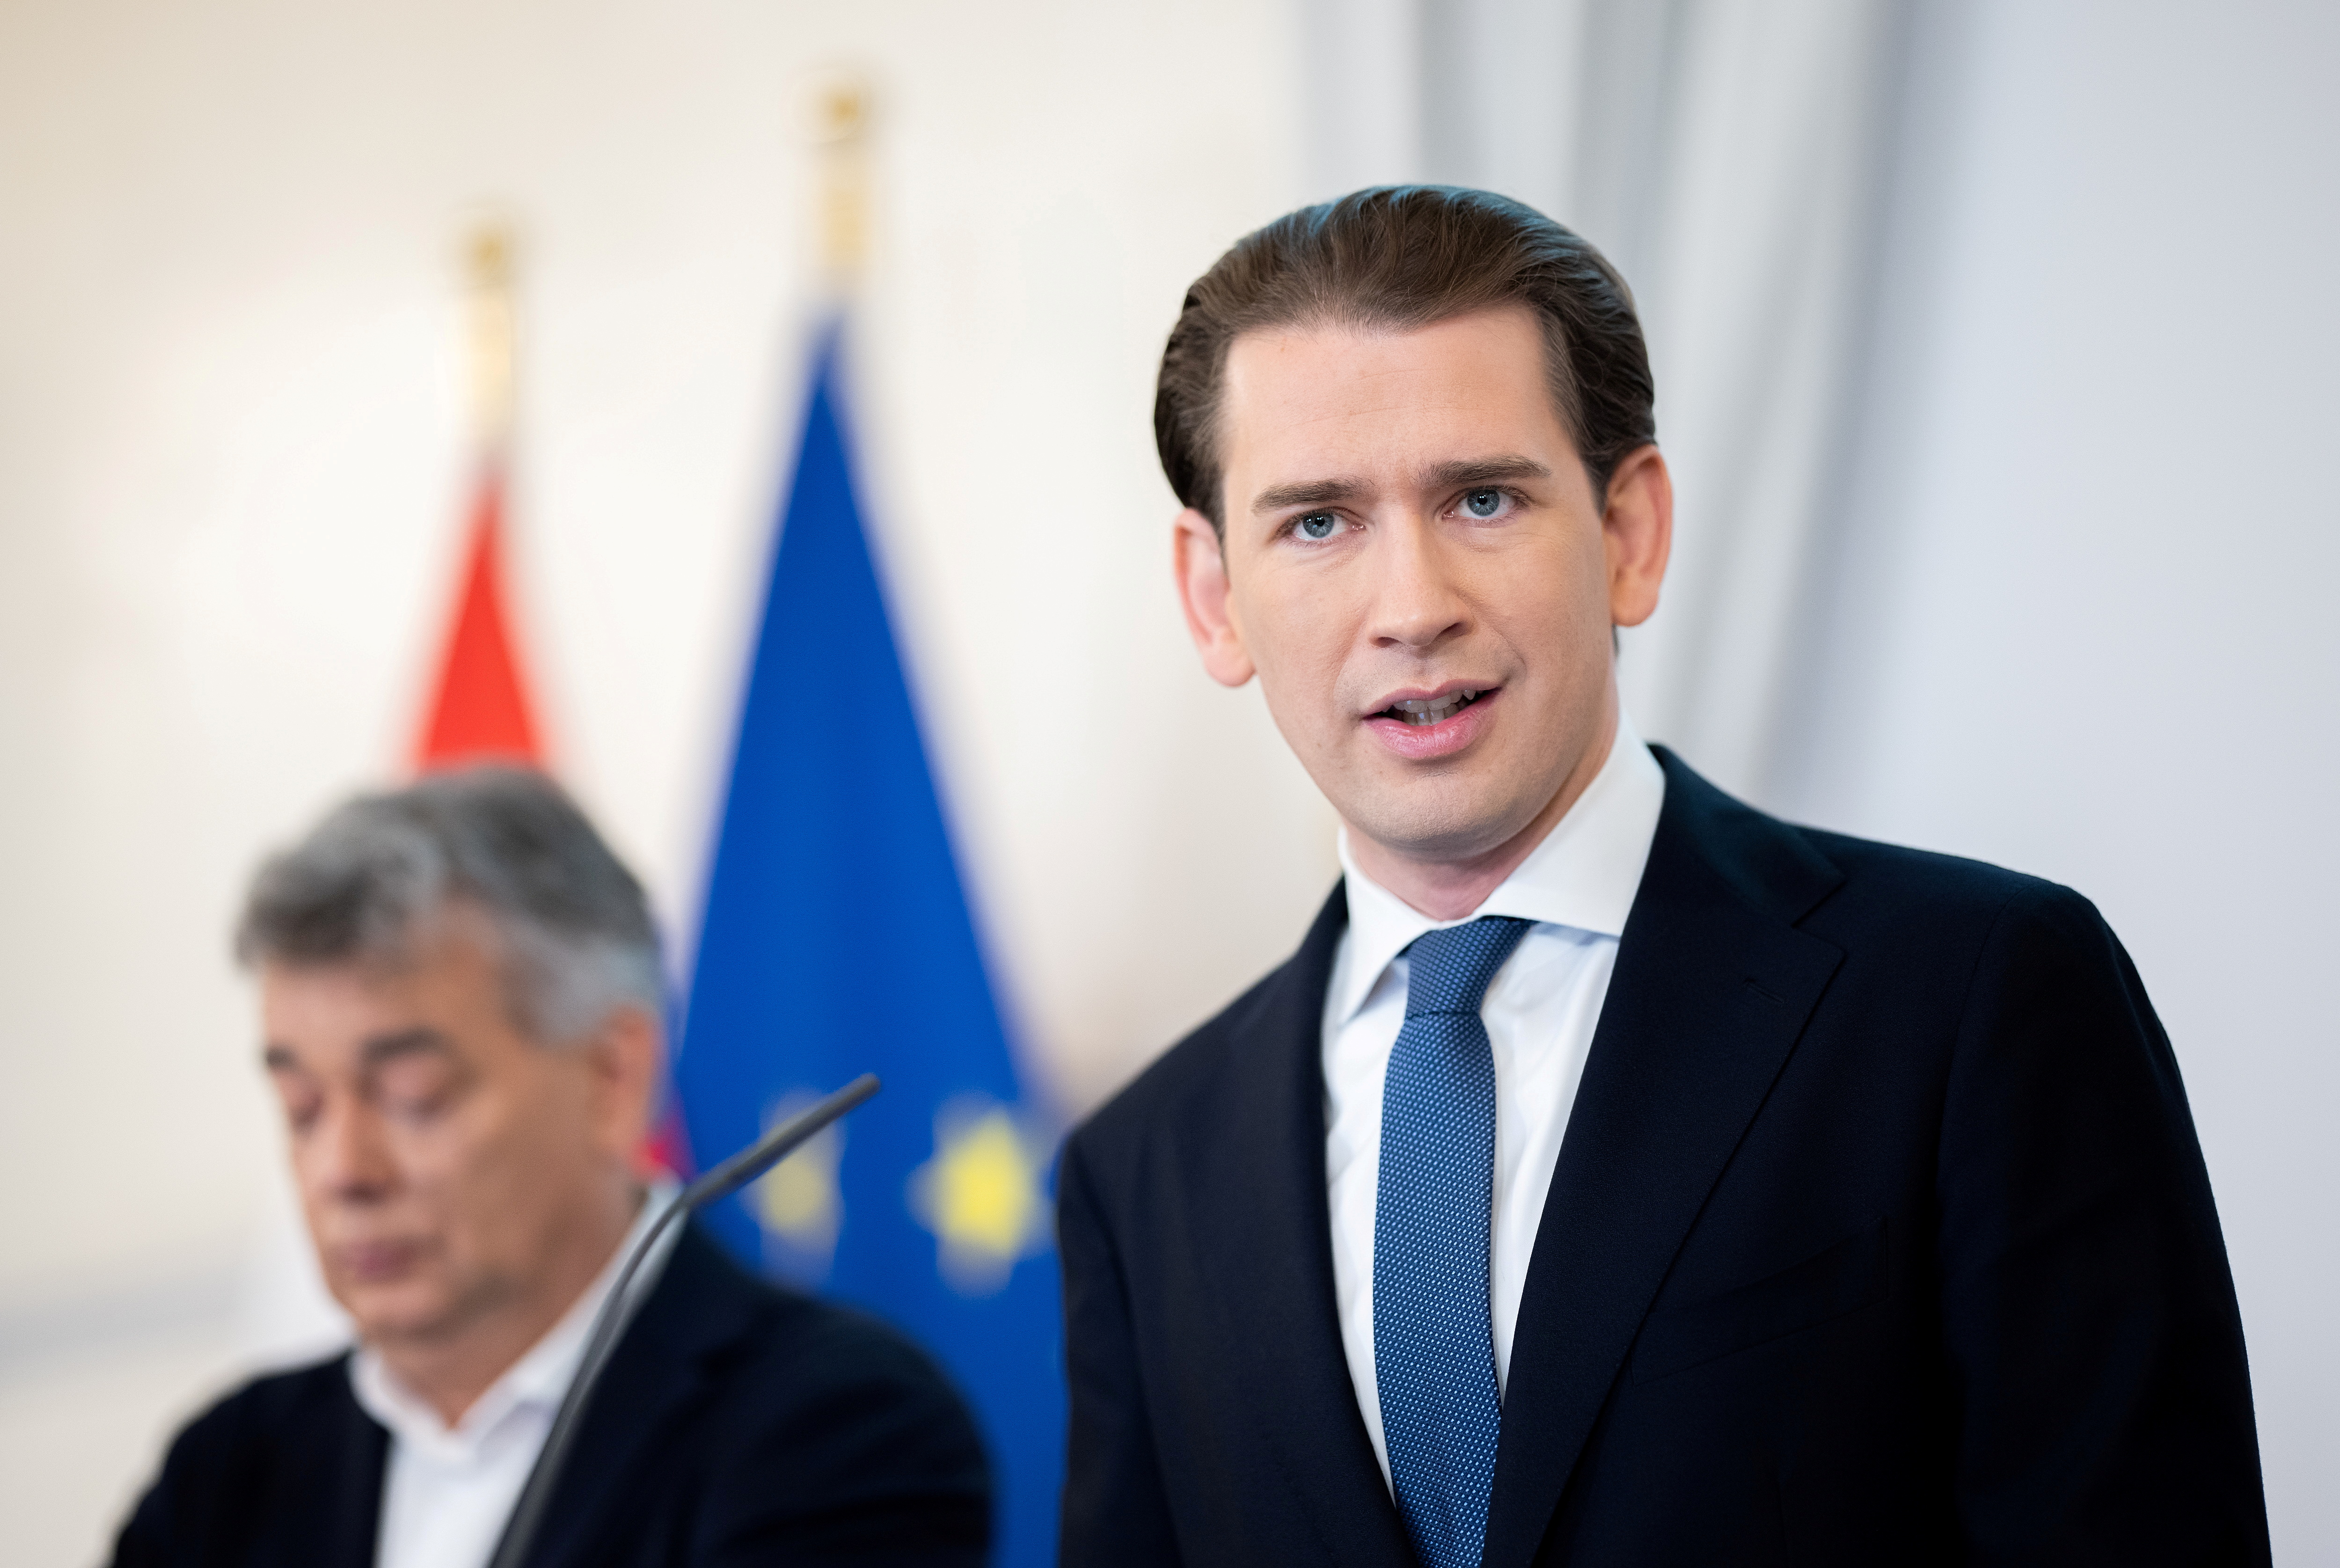 Austria's government presents plans for an eco-social tax reform